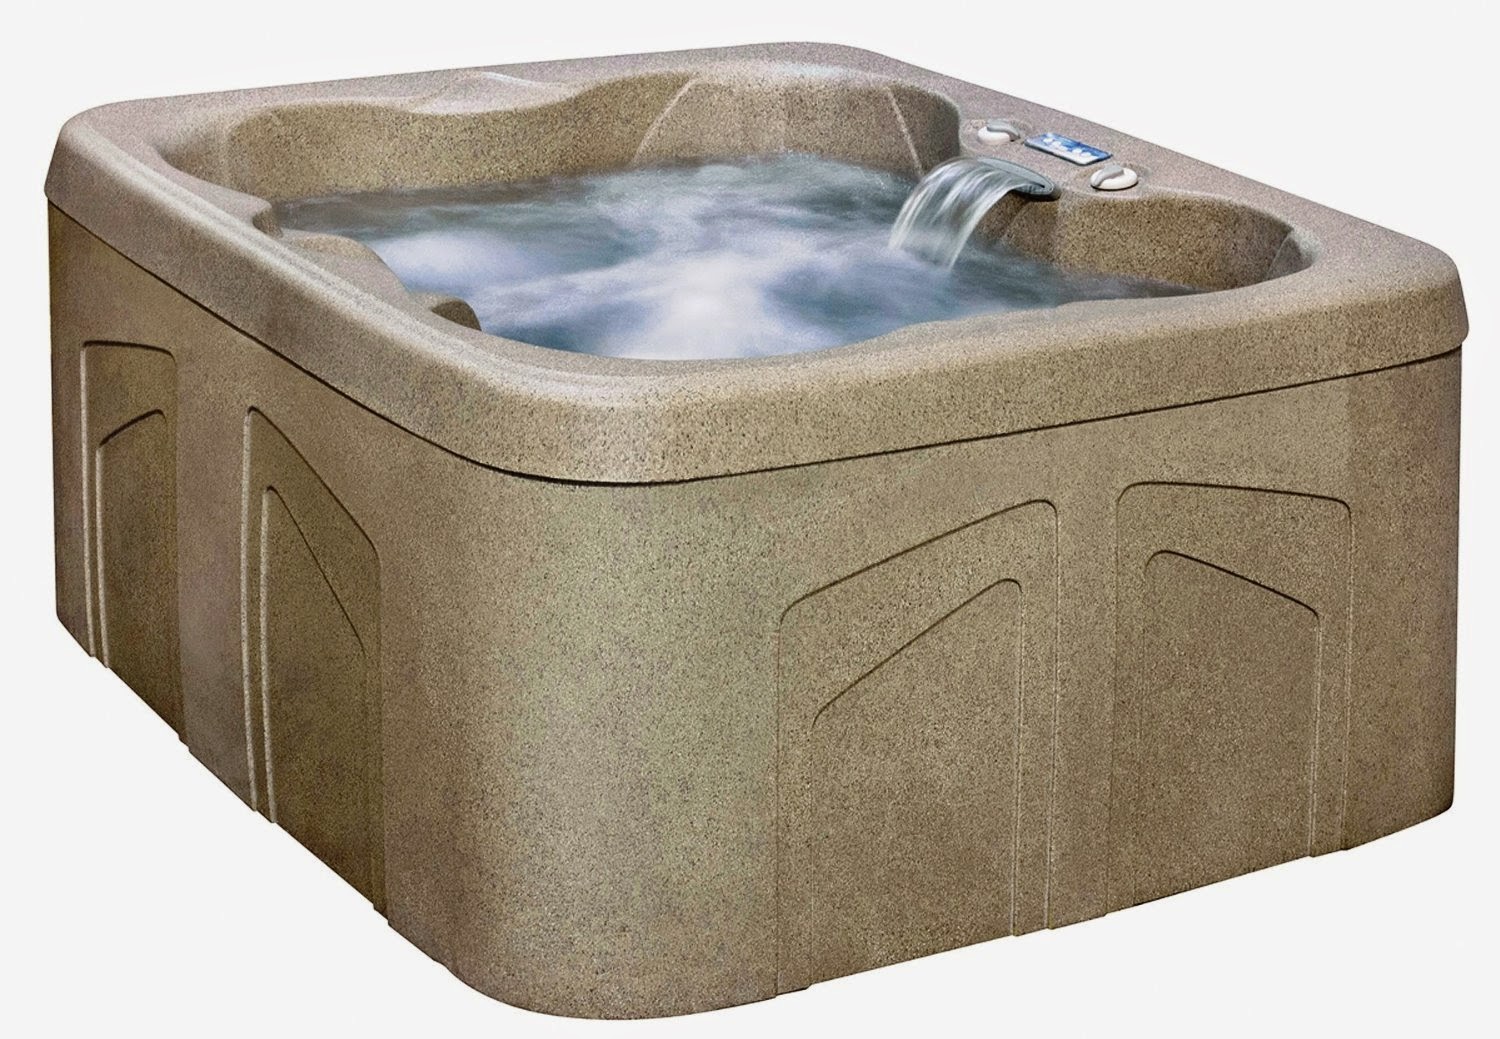 Lifesmart Rock Solid Simplicity Plug & Play 4 Person Spa with 12 Jets and waterfall feature, review